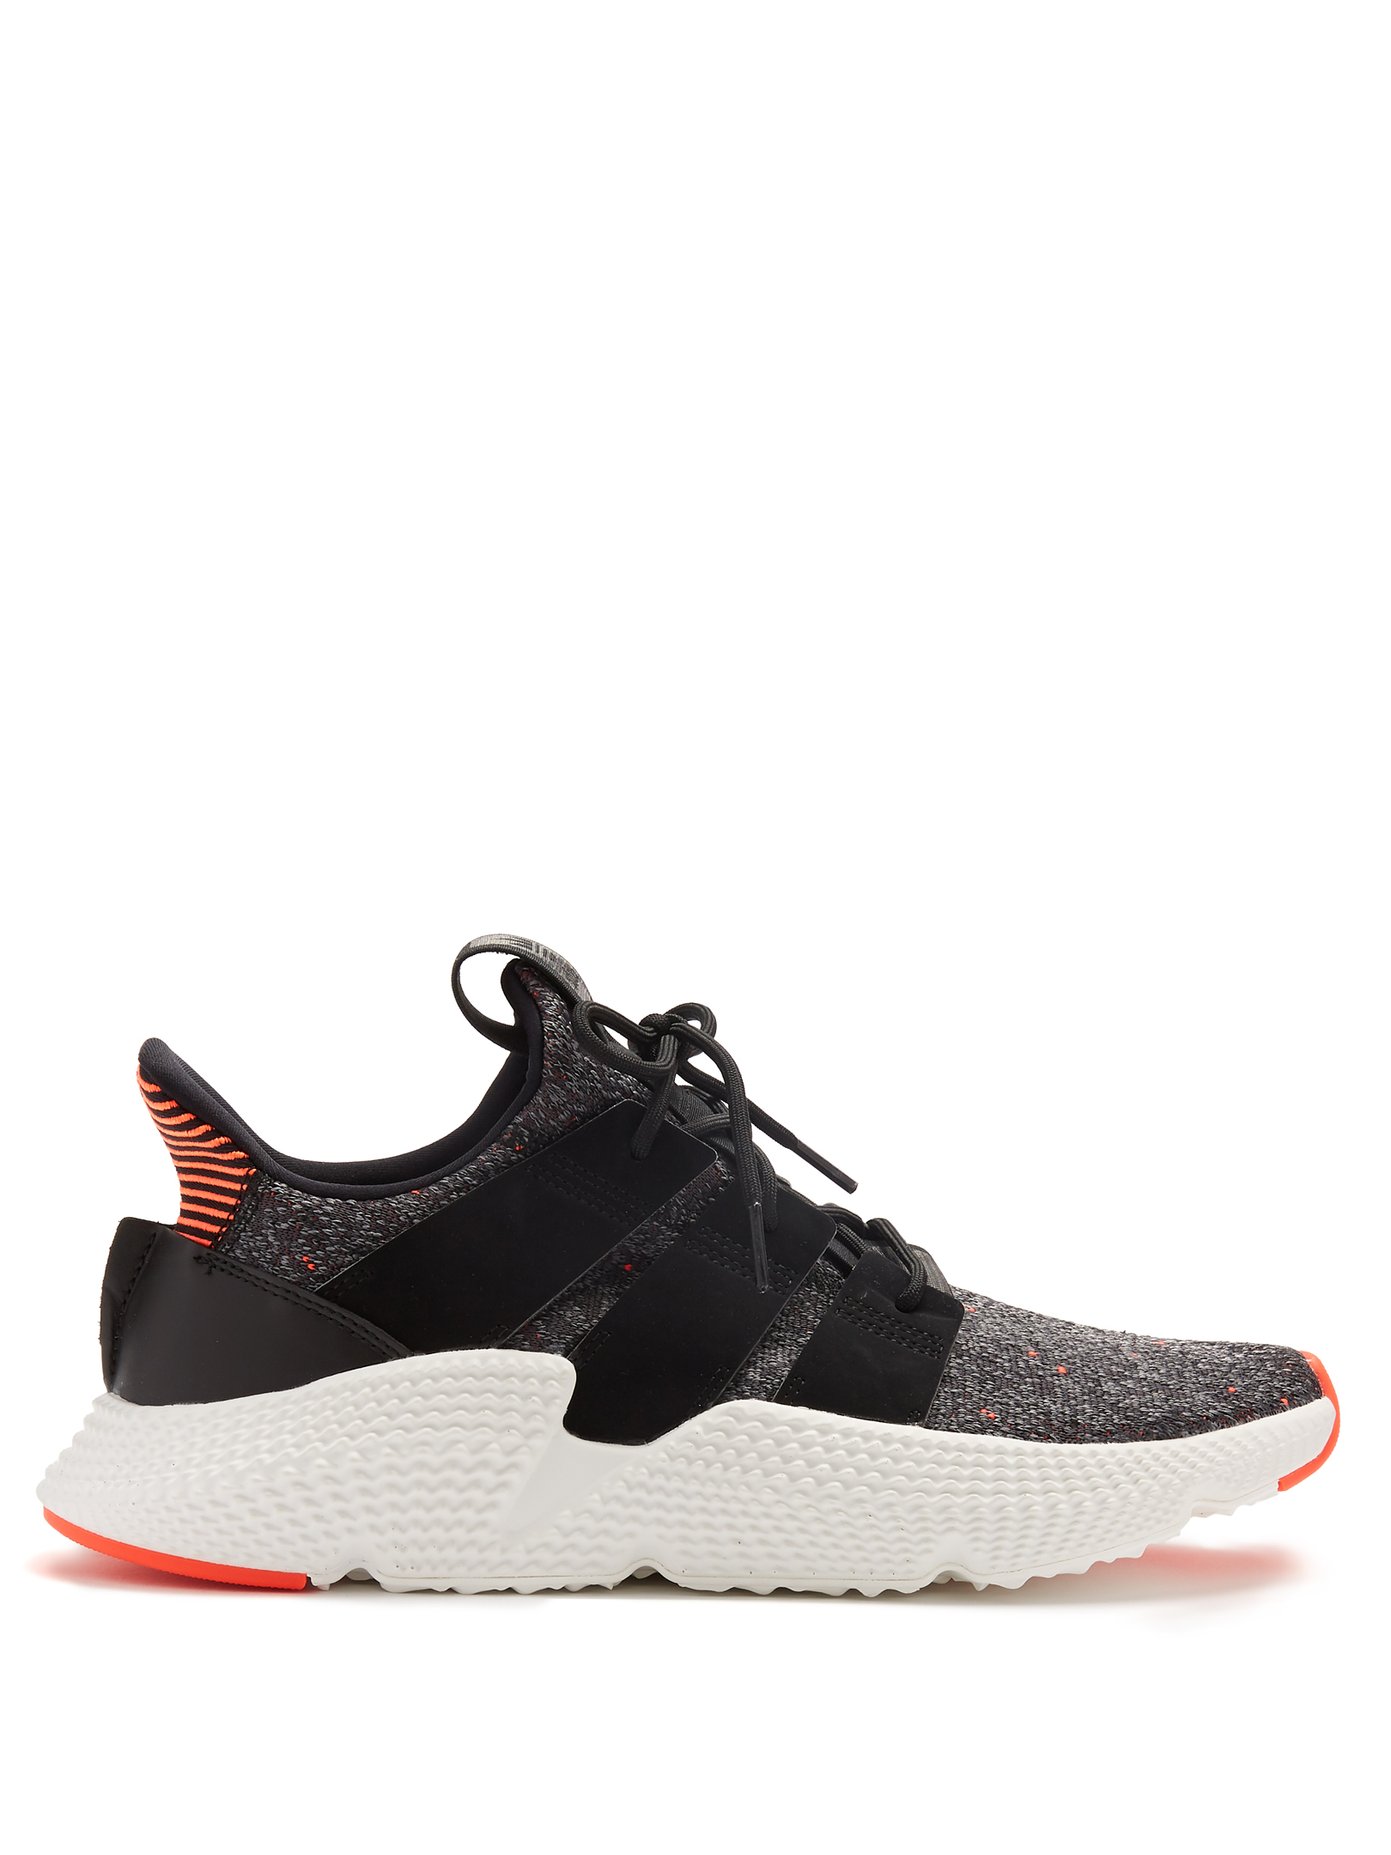 adidas prophere trainers